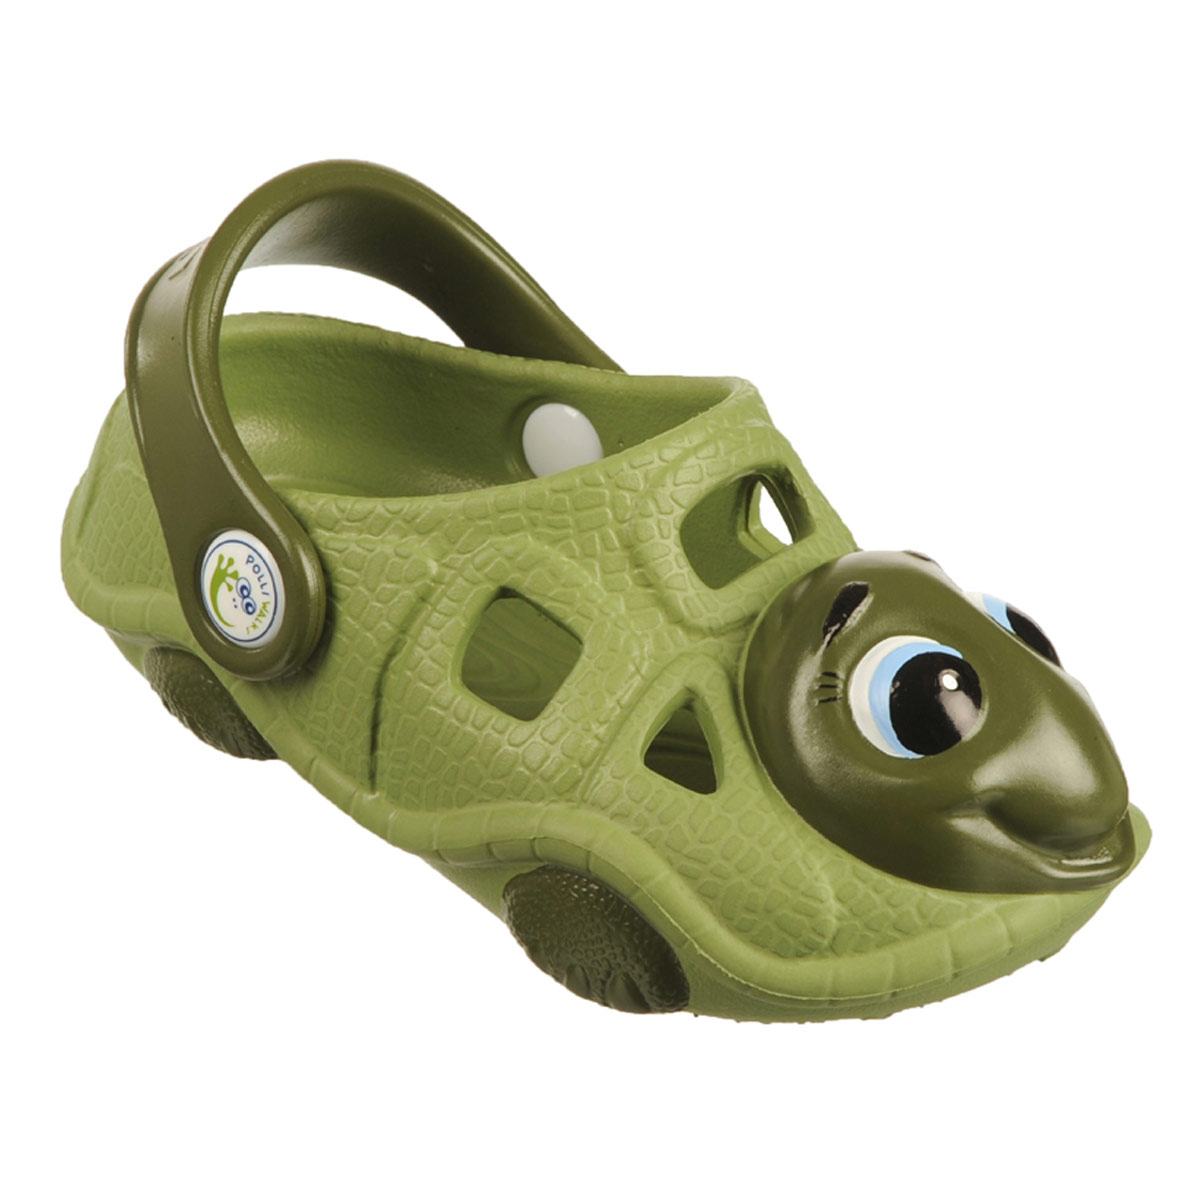 Polliwalks : Toddler shoes Timmy the Turtle Green # 10